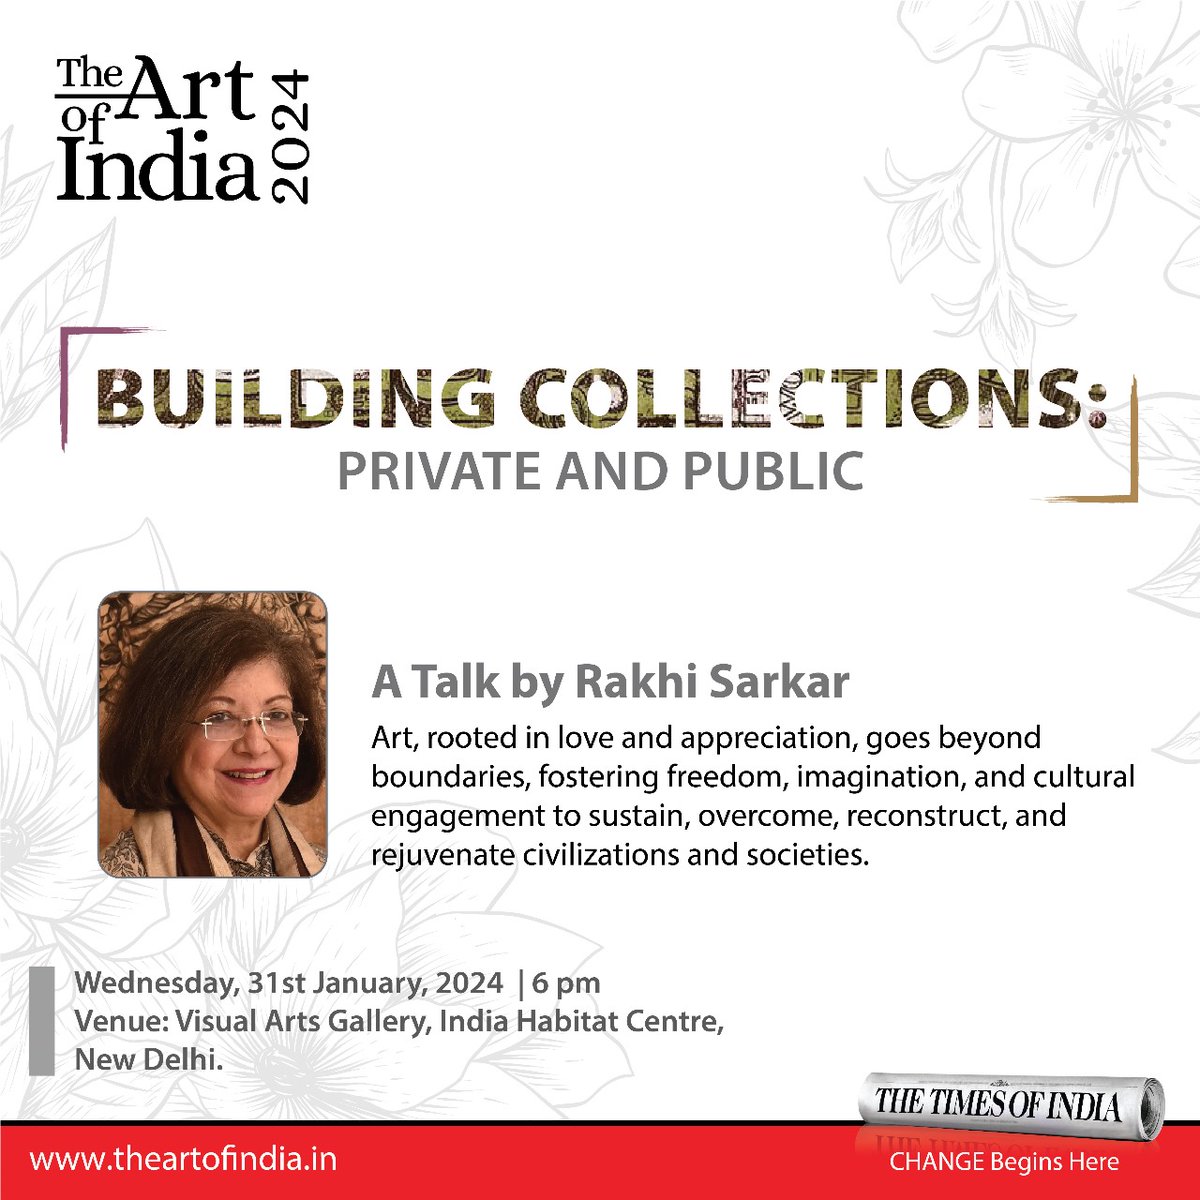 Explore the dynamics of collections as you delve into a cultural engagement.

Don't miss 'Building Collections: Private and Public' on 31st Jan 2024, 6:00 PM at Visual Arts Gallery, India Habitat Centre, New Delhi.

#TheArtOfIndia2024 #TheArtOfIndia #TOI #TOITheArtOfIndia